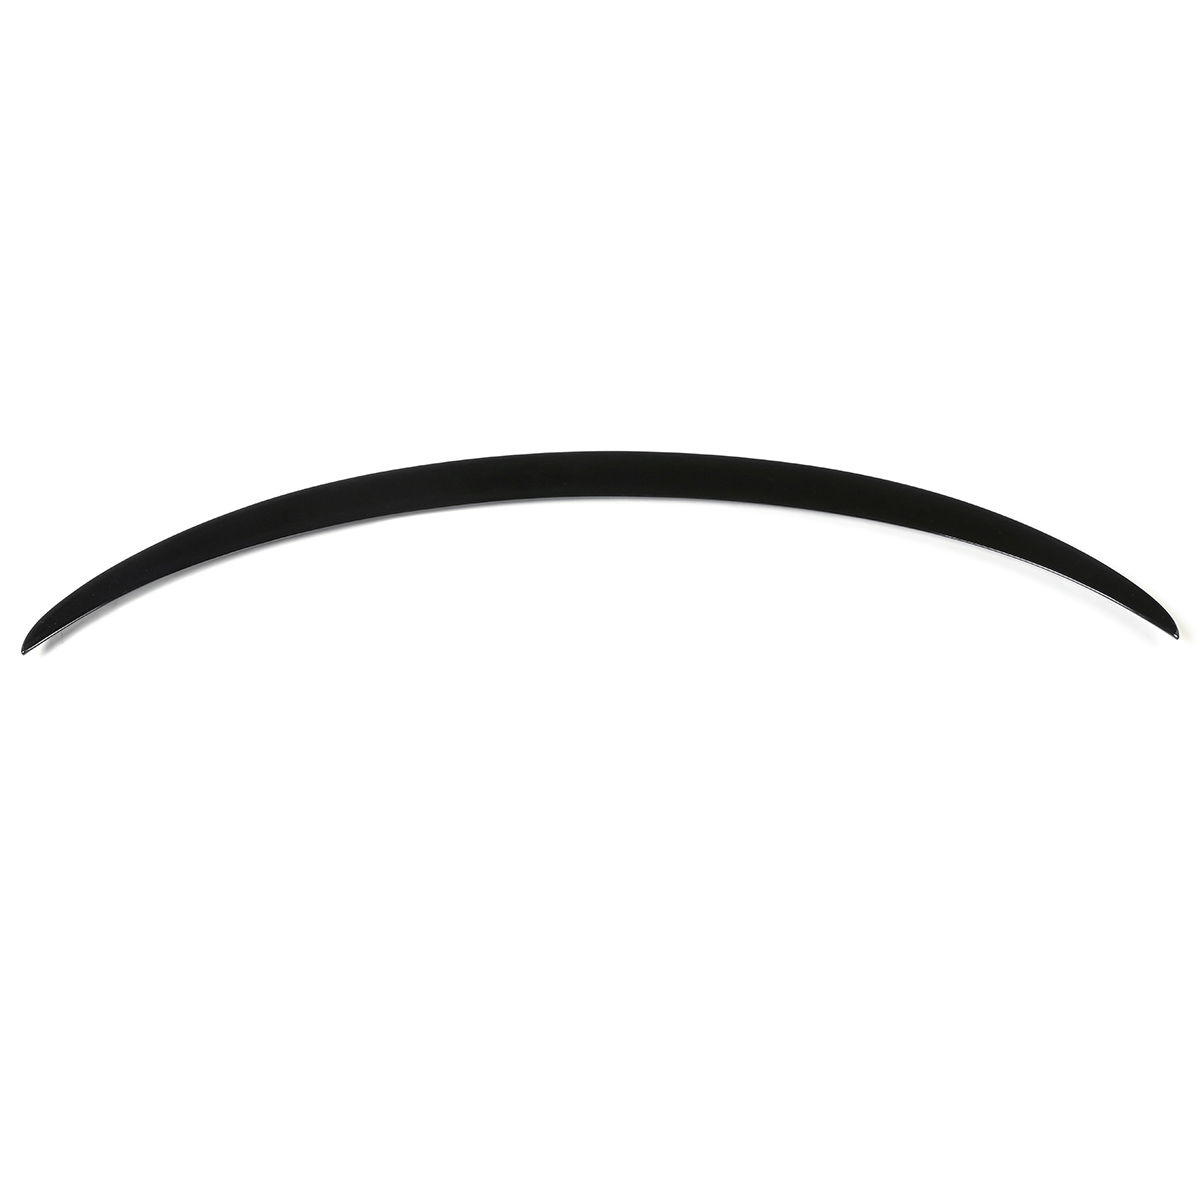 Car Rear Trunk Boot Lip Spoiler Gloss Black for Benz Mercedes Class W117 C117 Amg Style